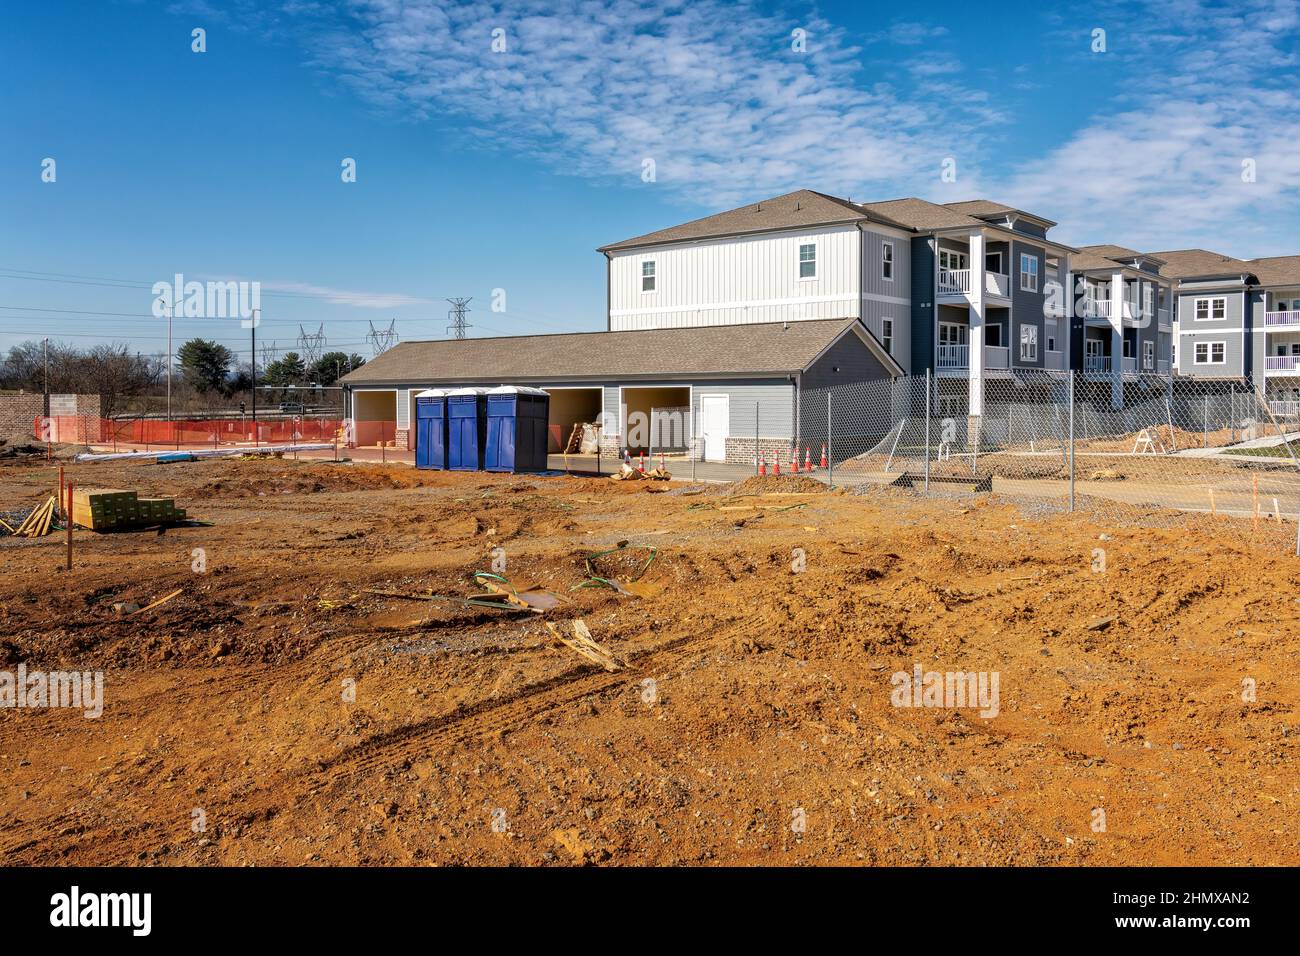 Horizontal shot of an apartment complext construction site with porta potties or portable toilets. Stock Photo